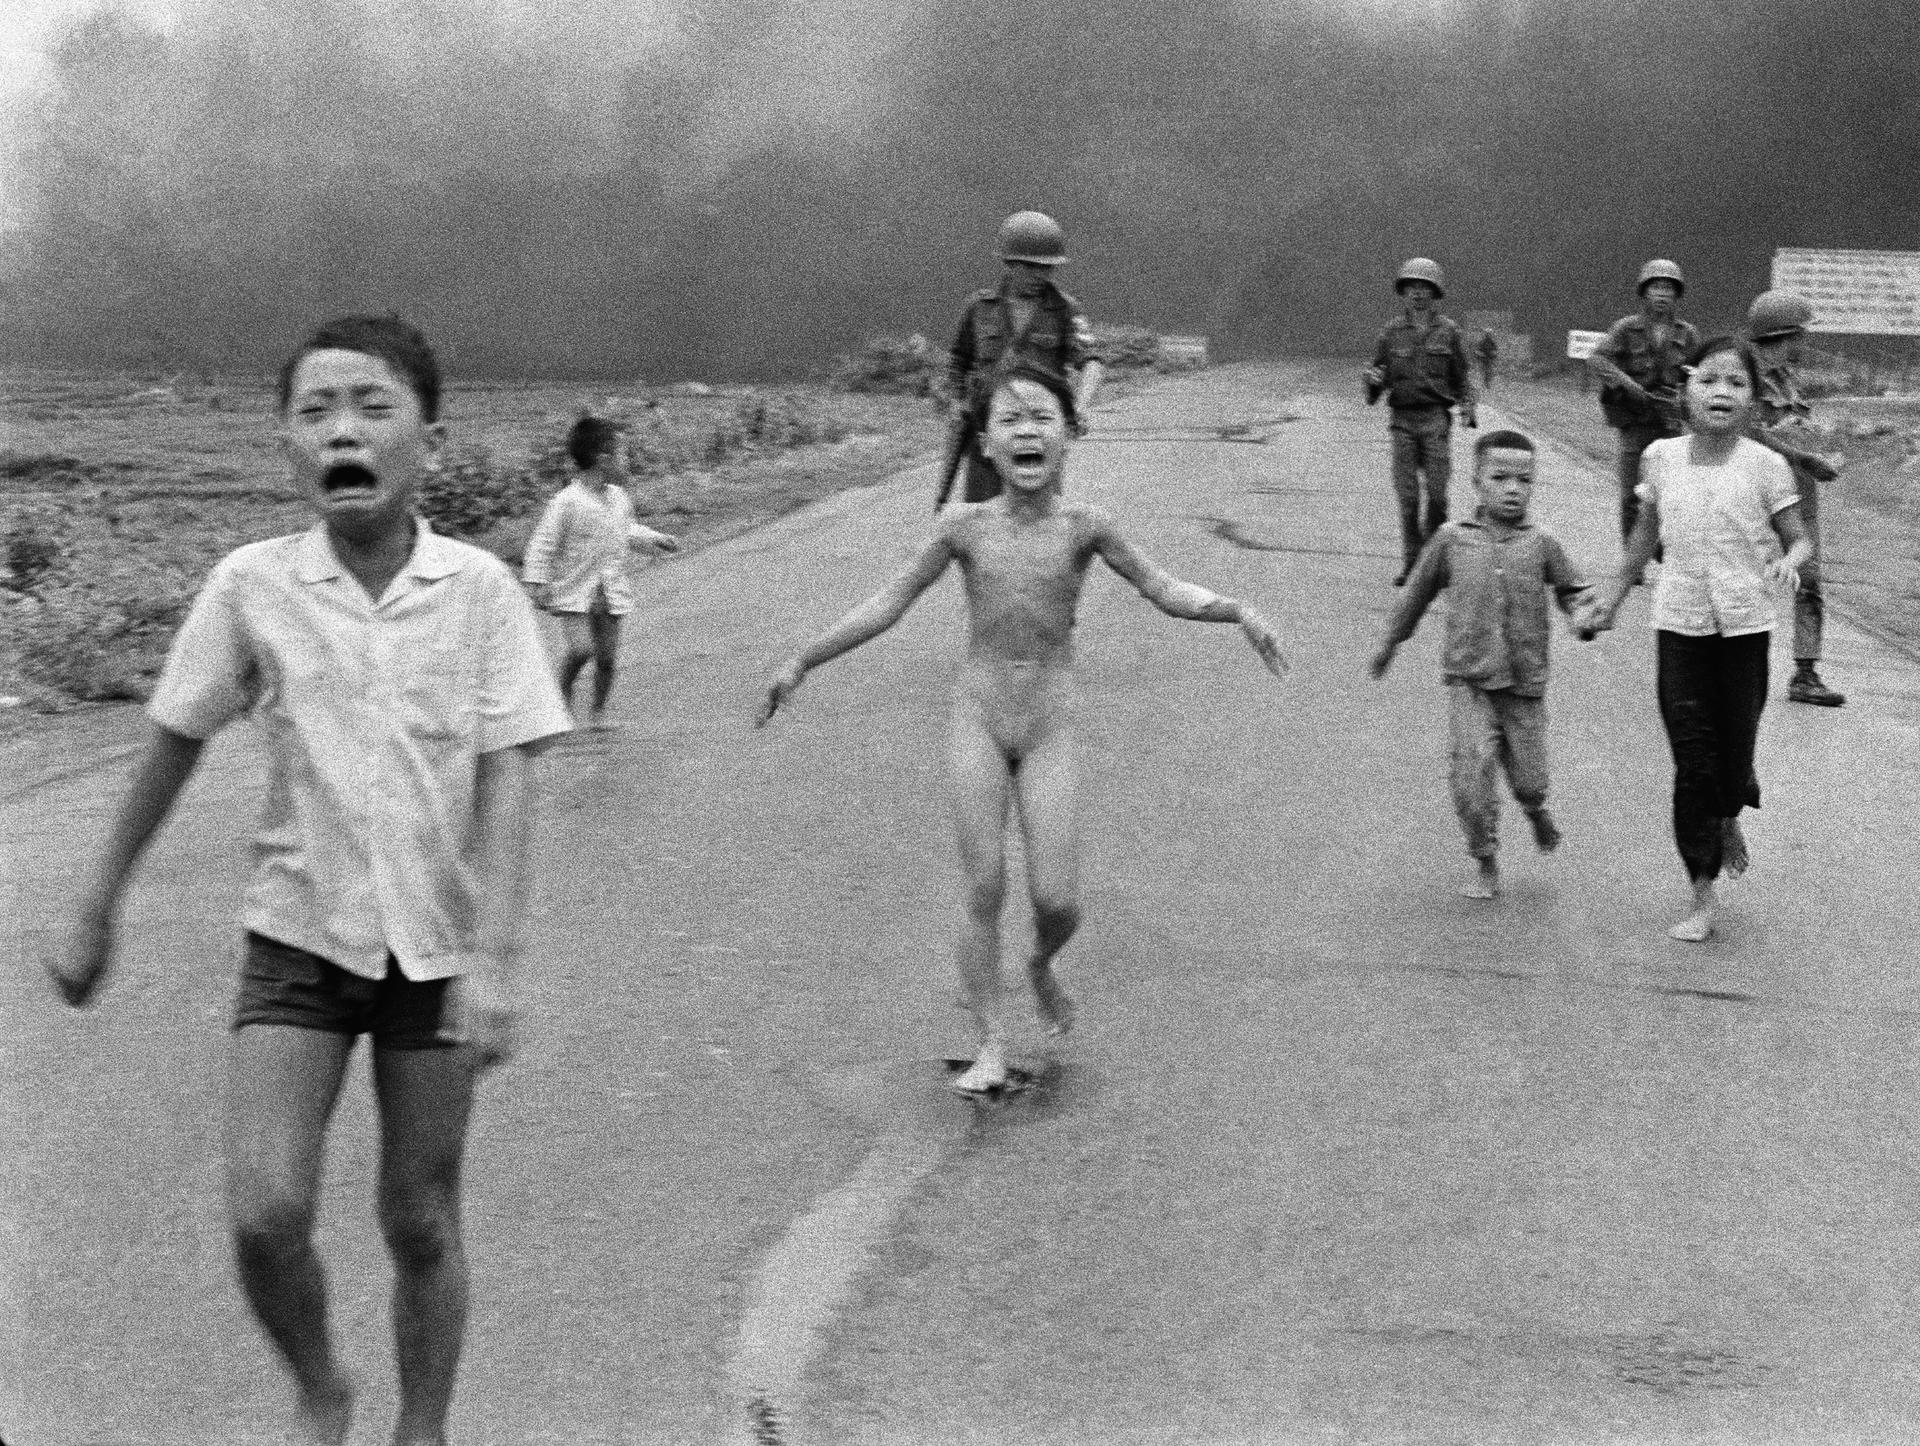 The iconic image of nine-year-old Phan Thi Kim Phuc taken during the Vietnam war in 1972 sums up the horror of a napalm strike. Photo: AP